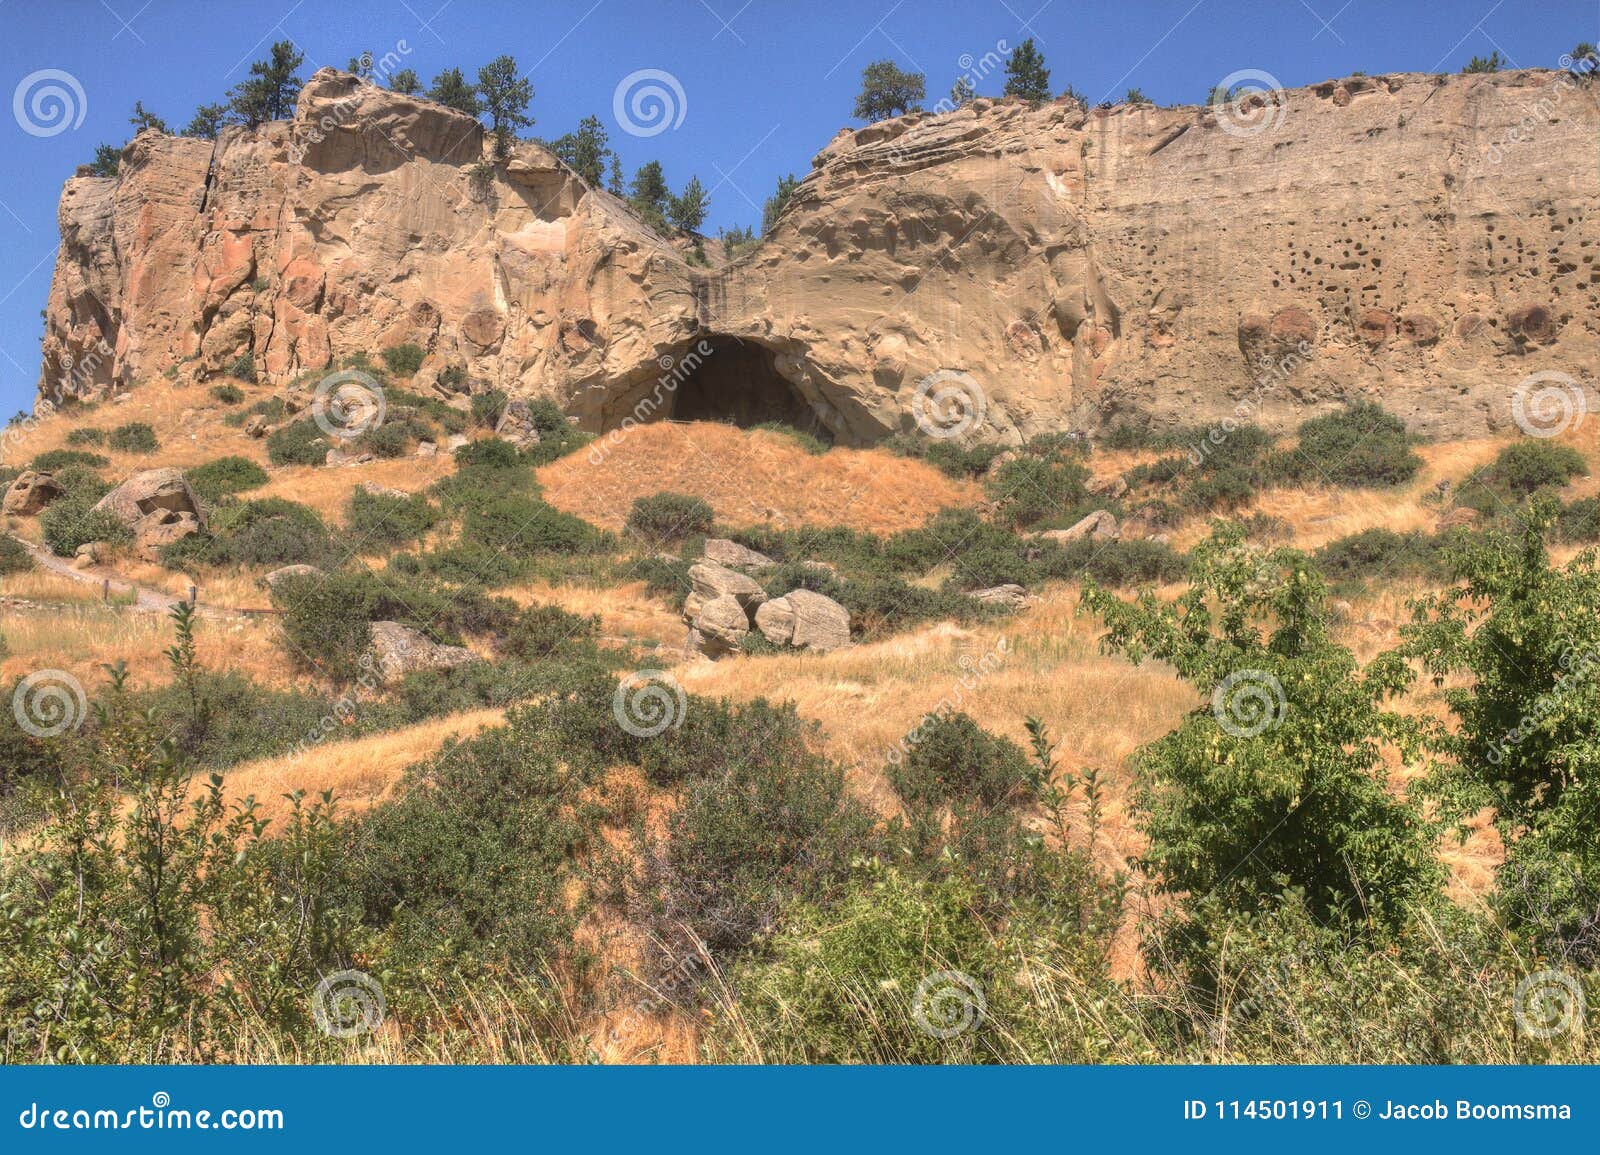 pictograph state park outside of billings, montana in summer